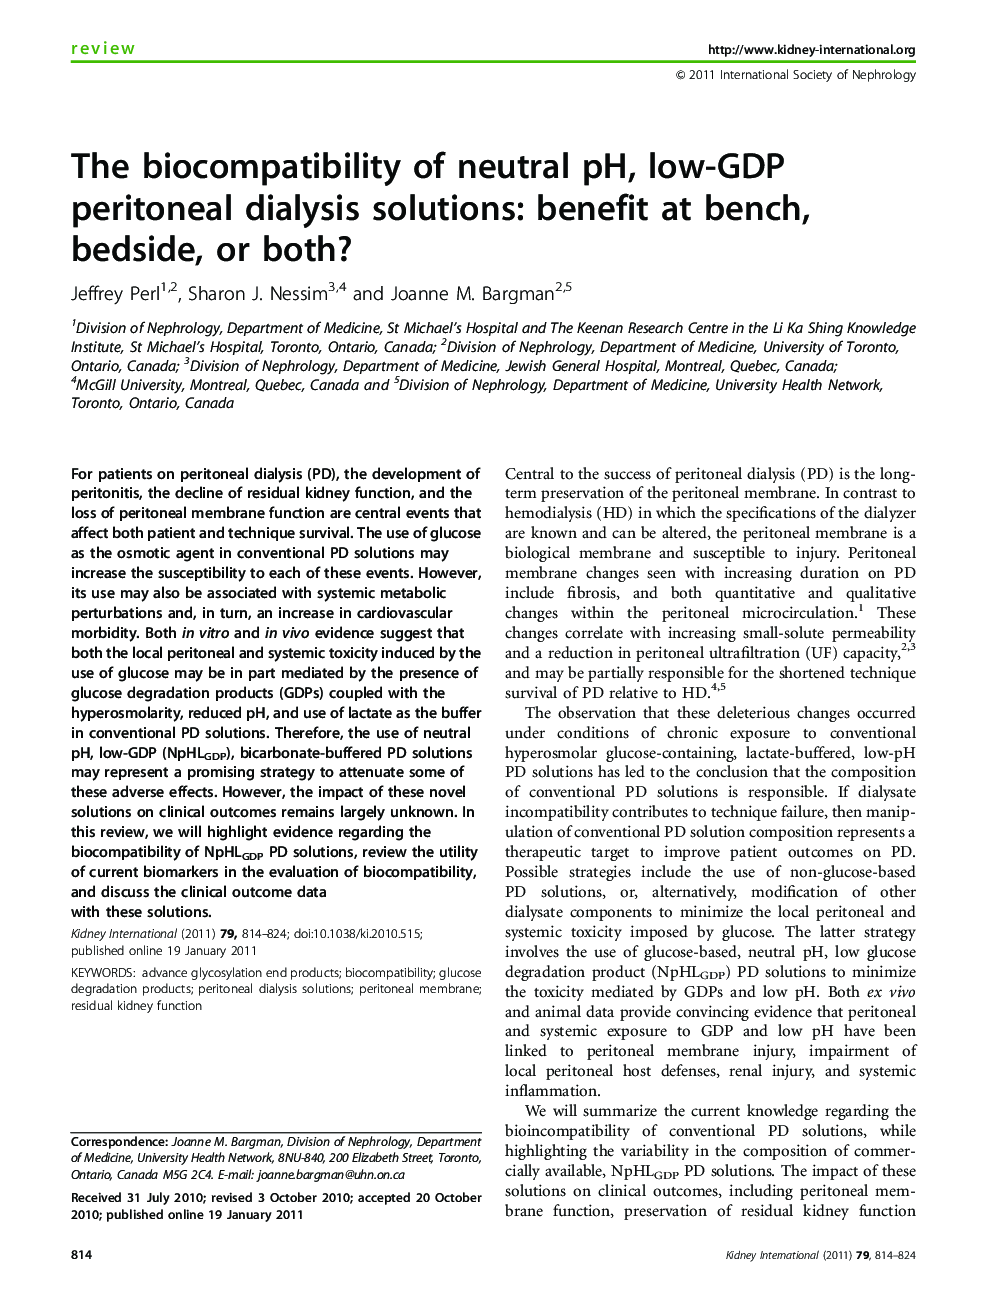 The biocompatibility of neutral pH, low-GDP peritoneal dialysis solutions: benefit at bench, bedside, or both? 